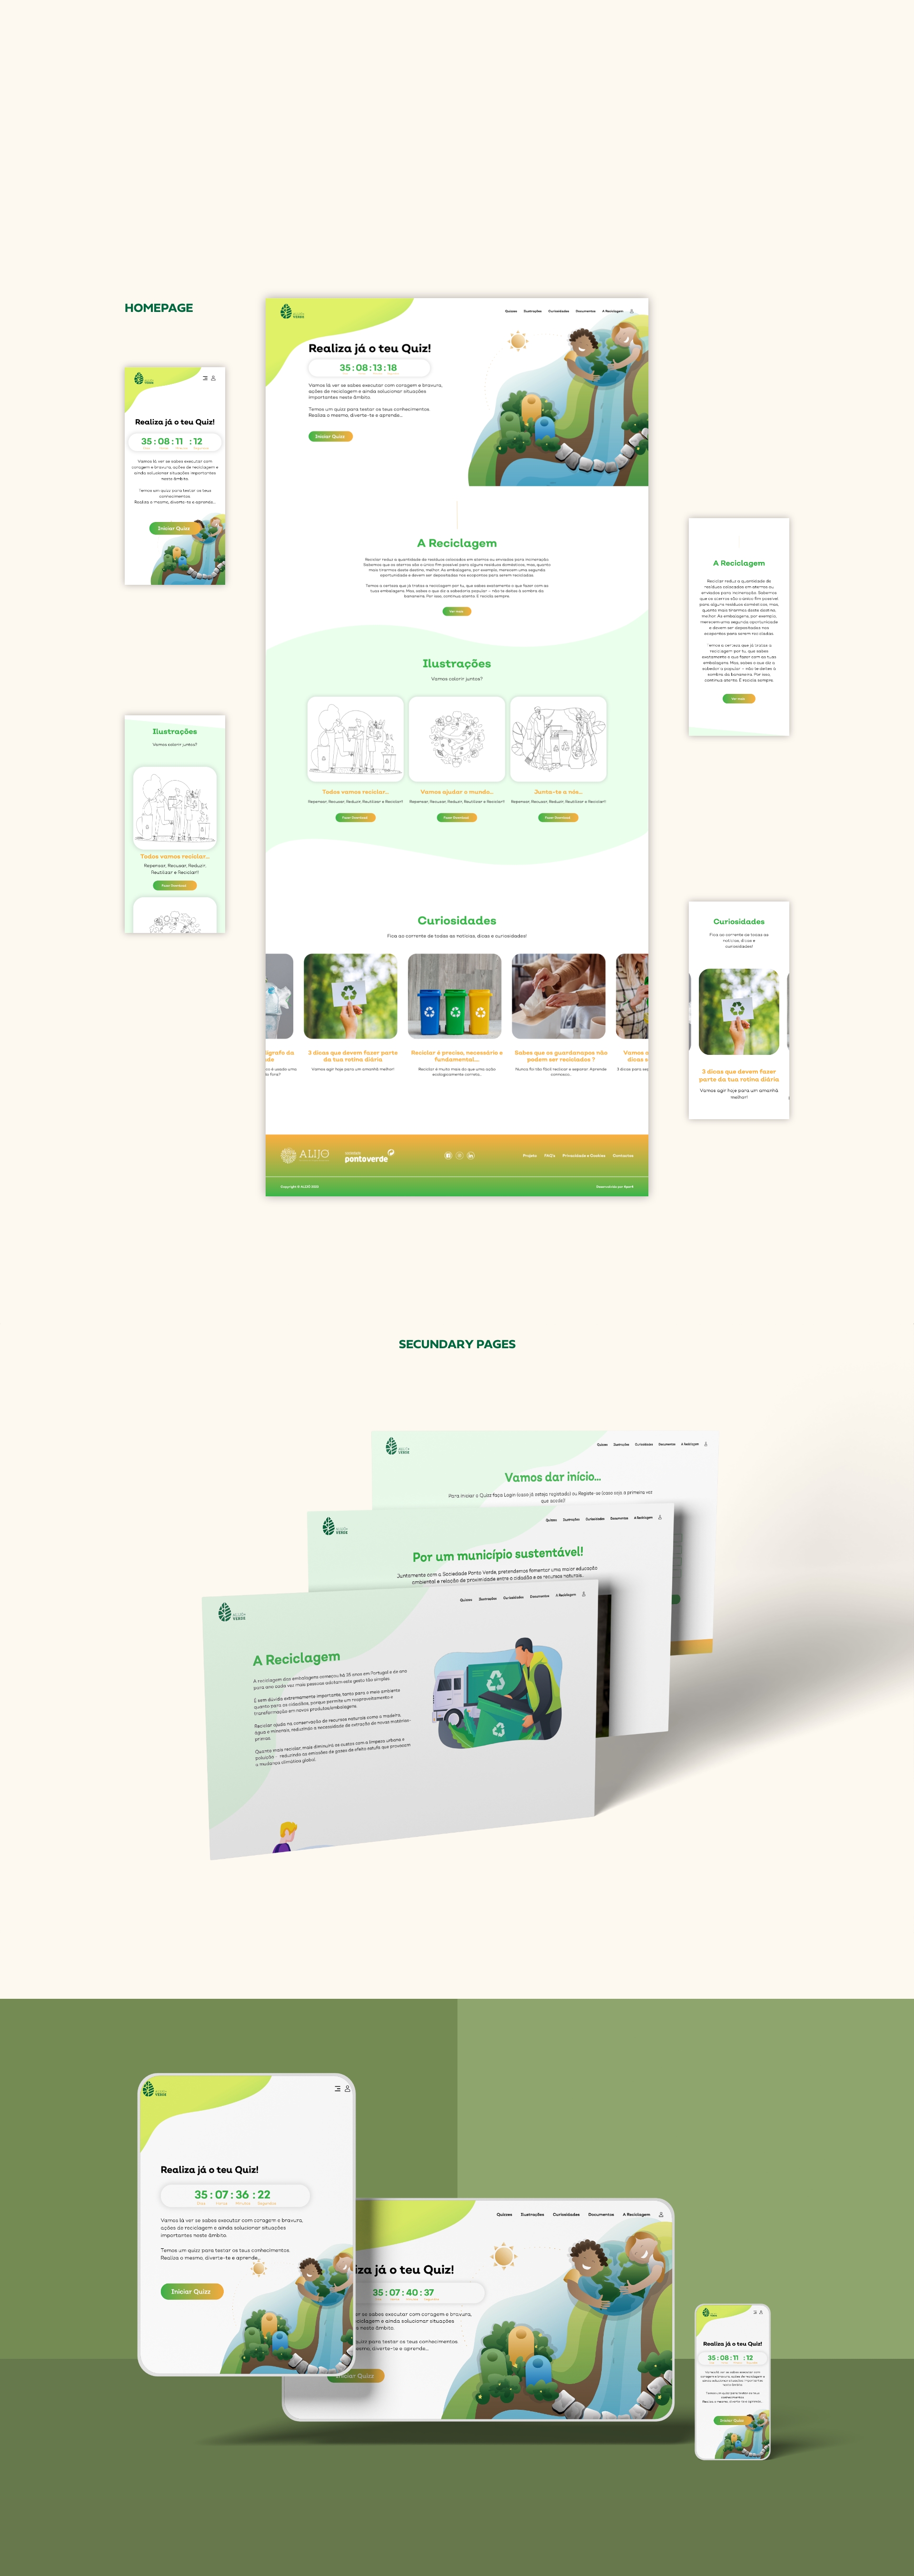 layout of the home page and secondary pages of alijo mais verde